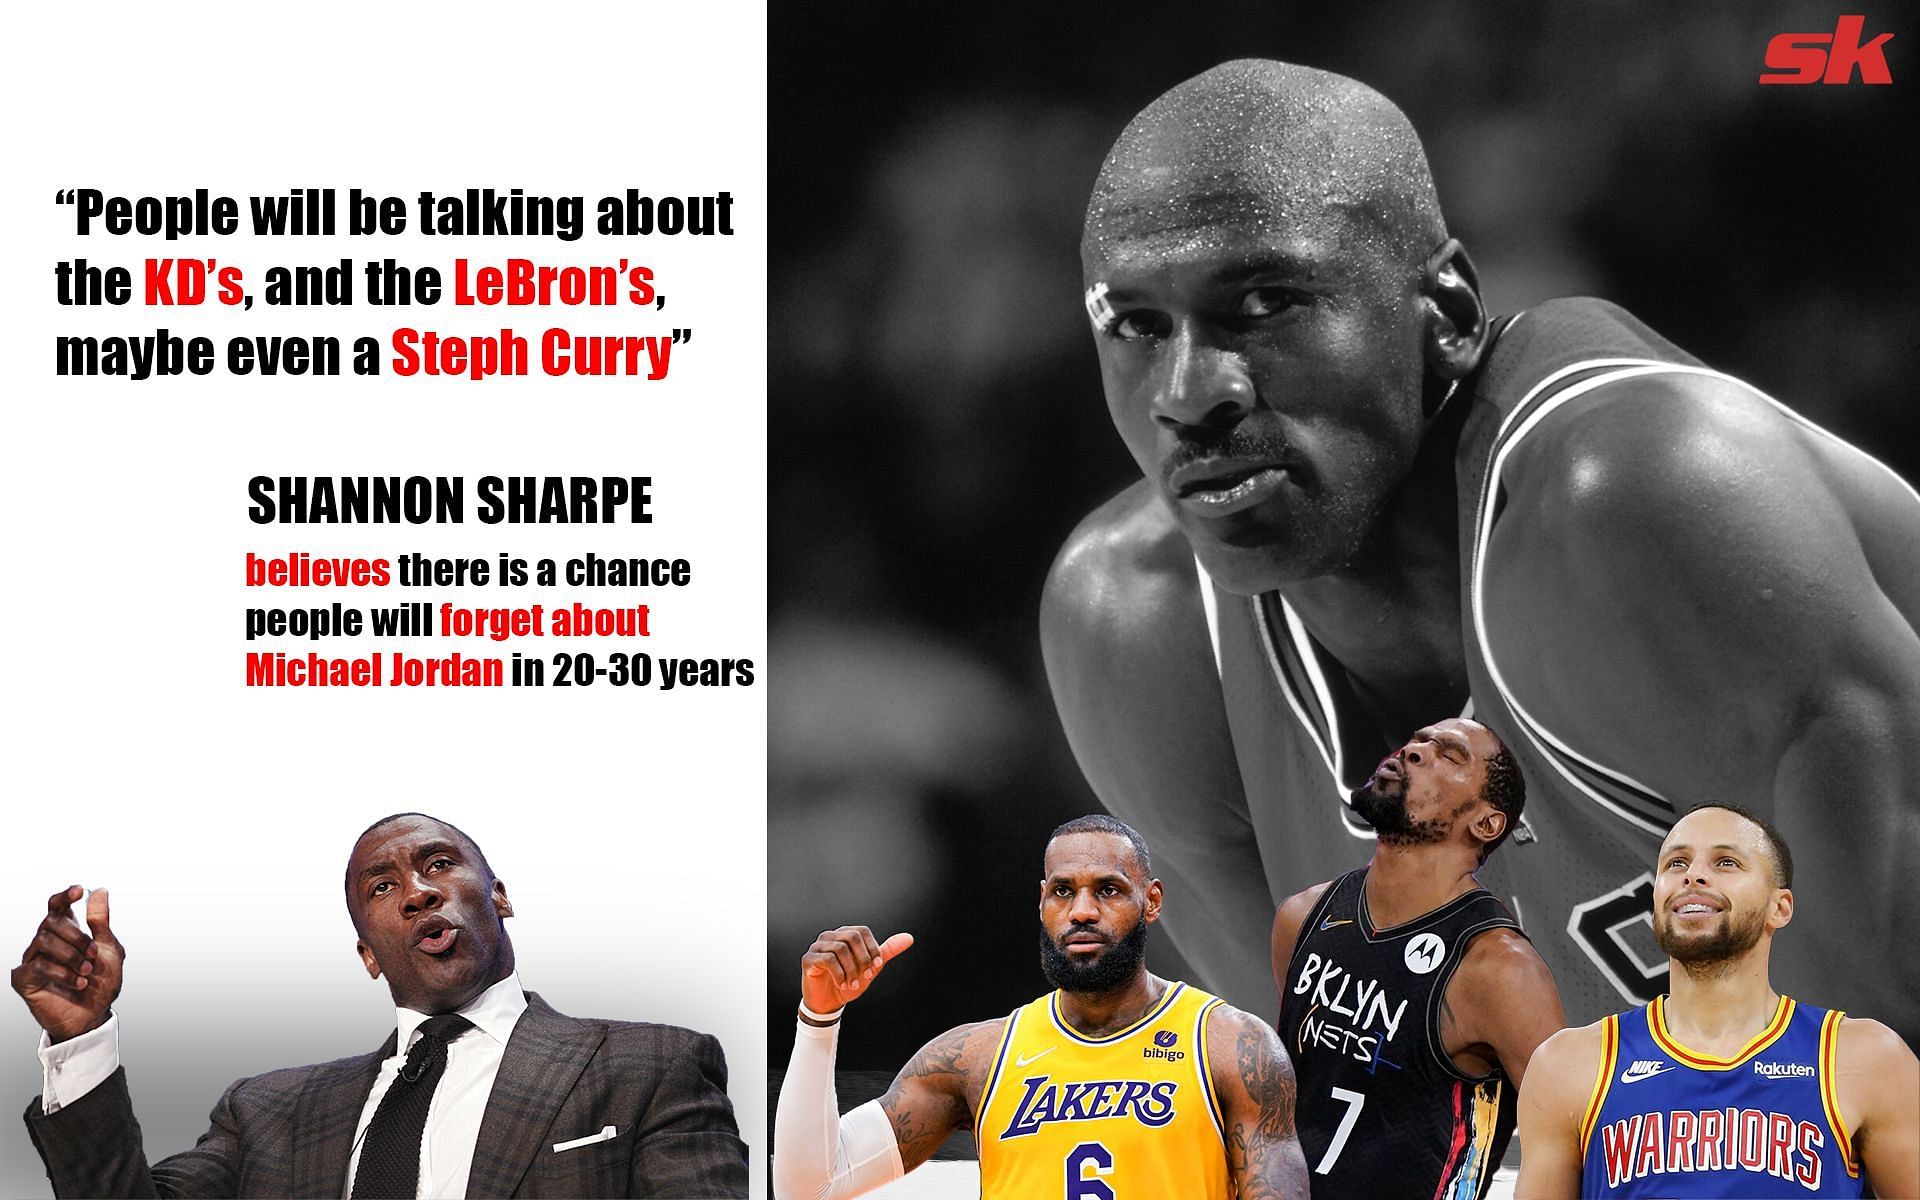 Shannon Sharpe believes in 20 or 30 years Michael Jordan could be forgotten and replaced with Kevin Durant, LeBron James and Steph Curry.